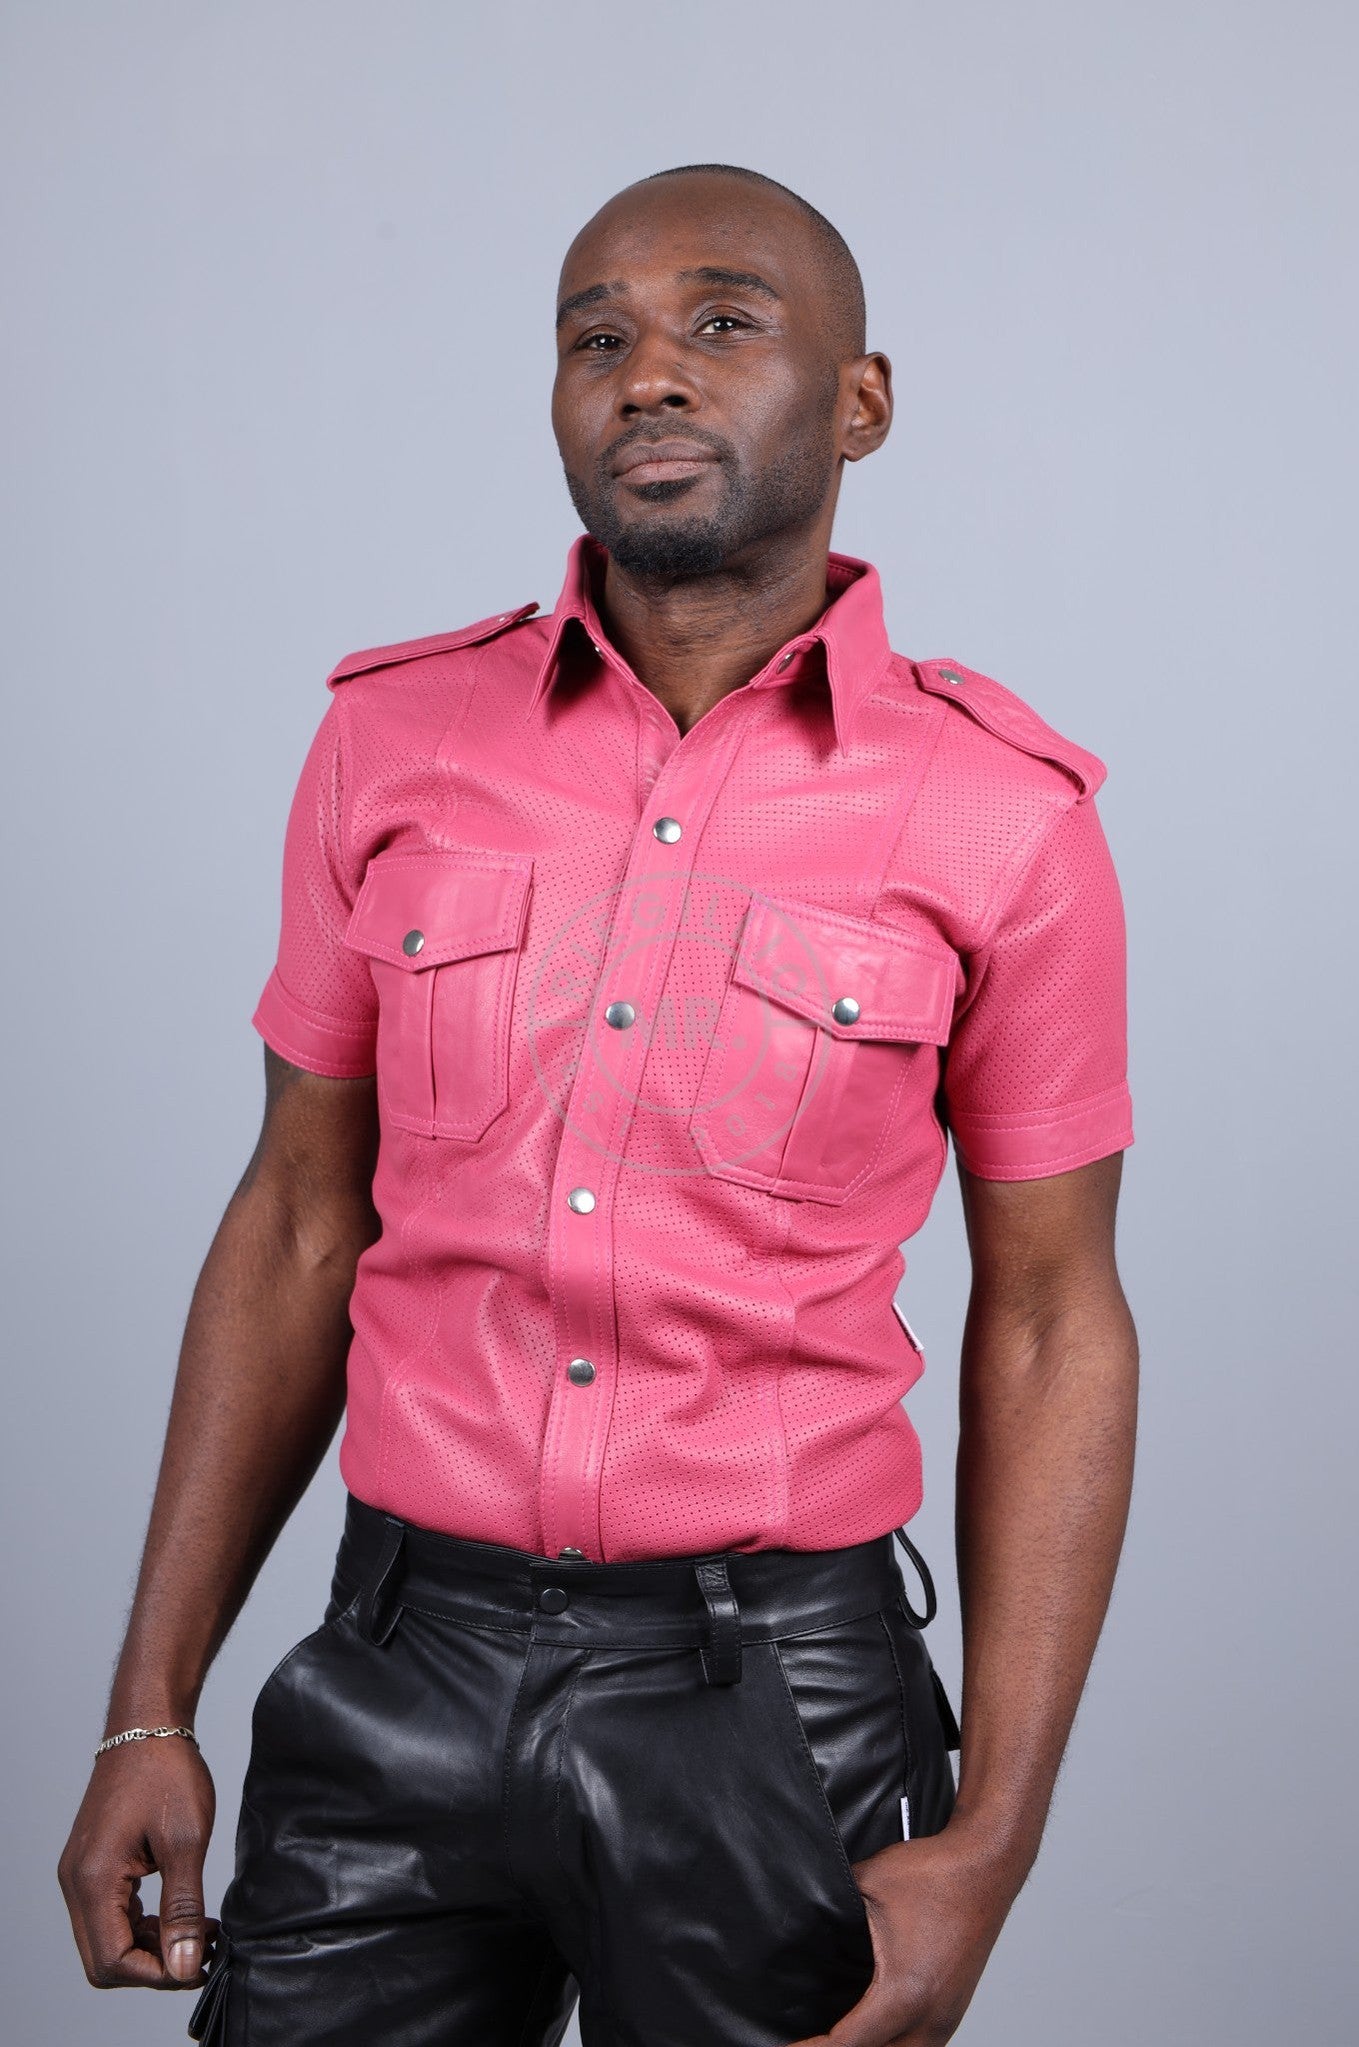 Pink Leather Perforated Shirt at MR. Riegillio